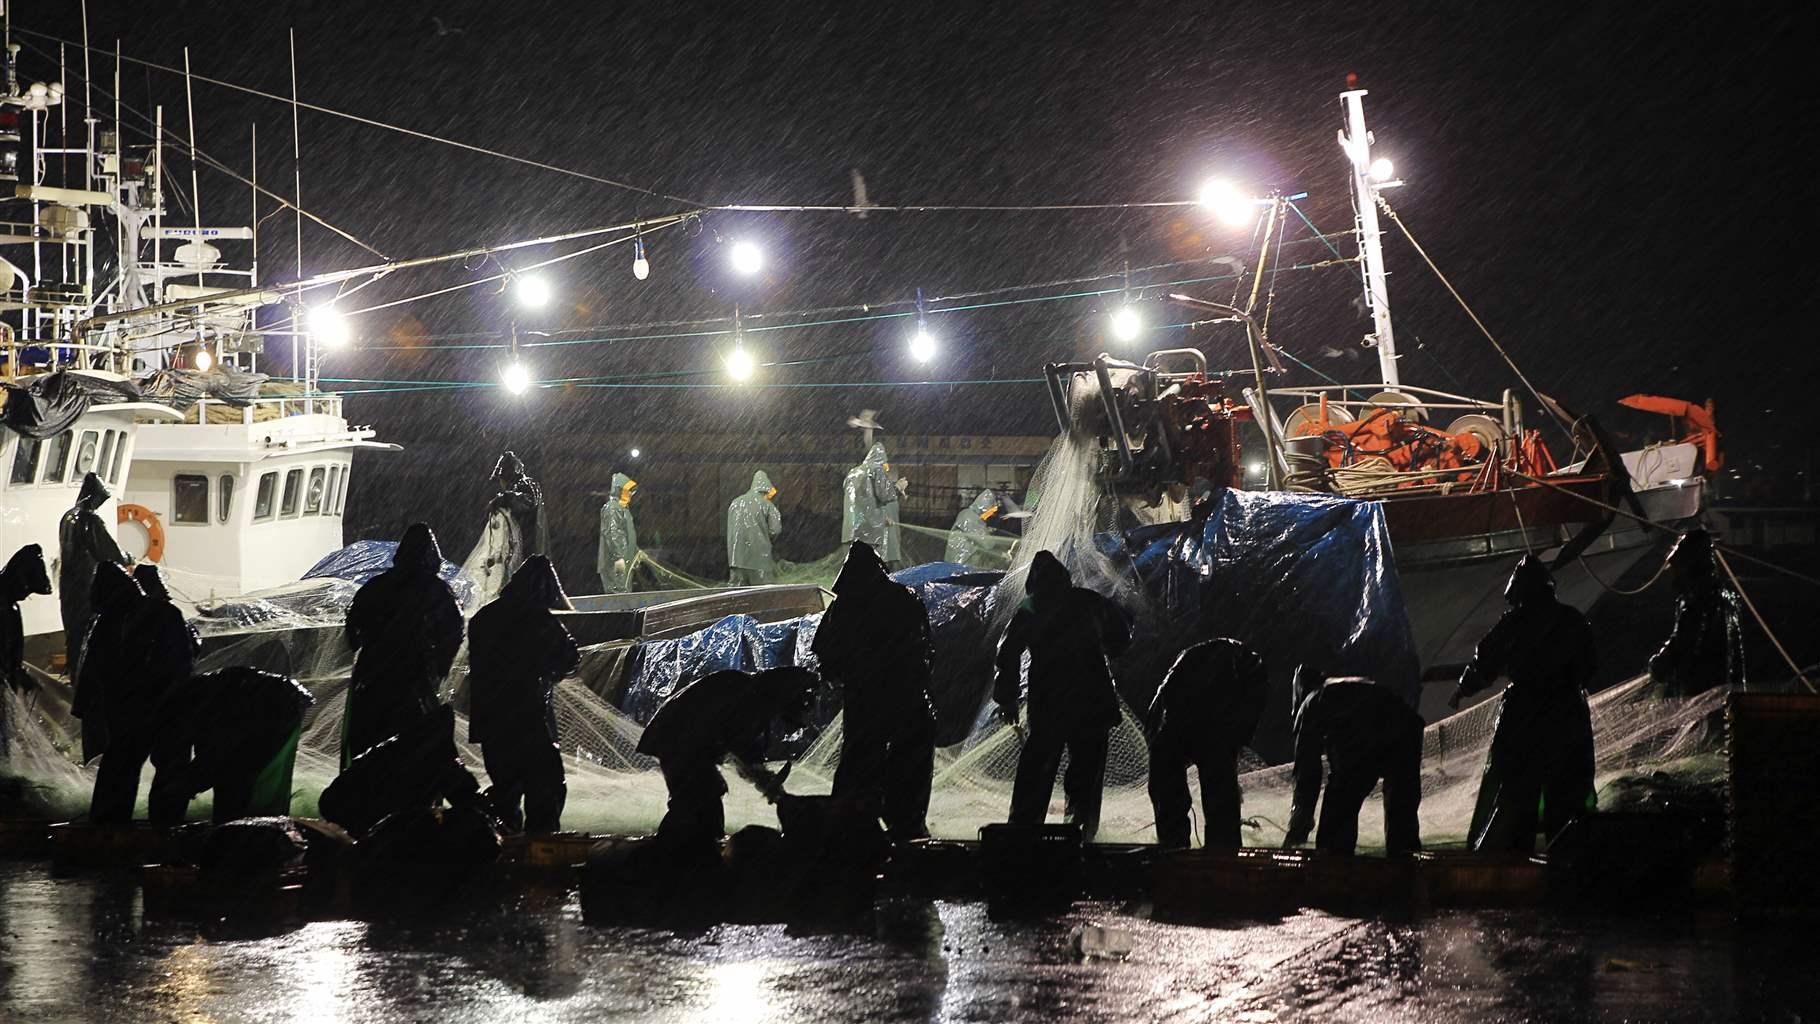 Fishermen Working Against Sky At Night During Monsoon